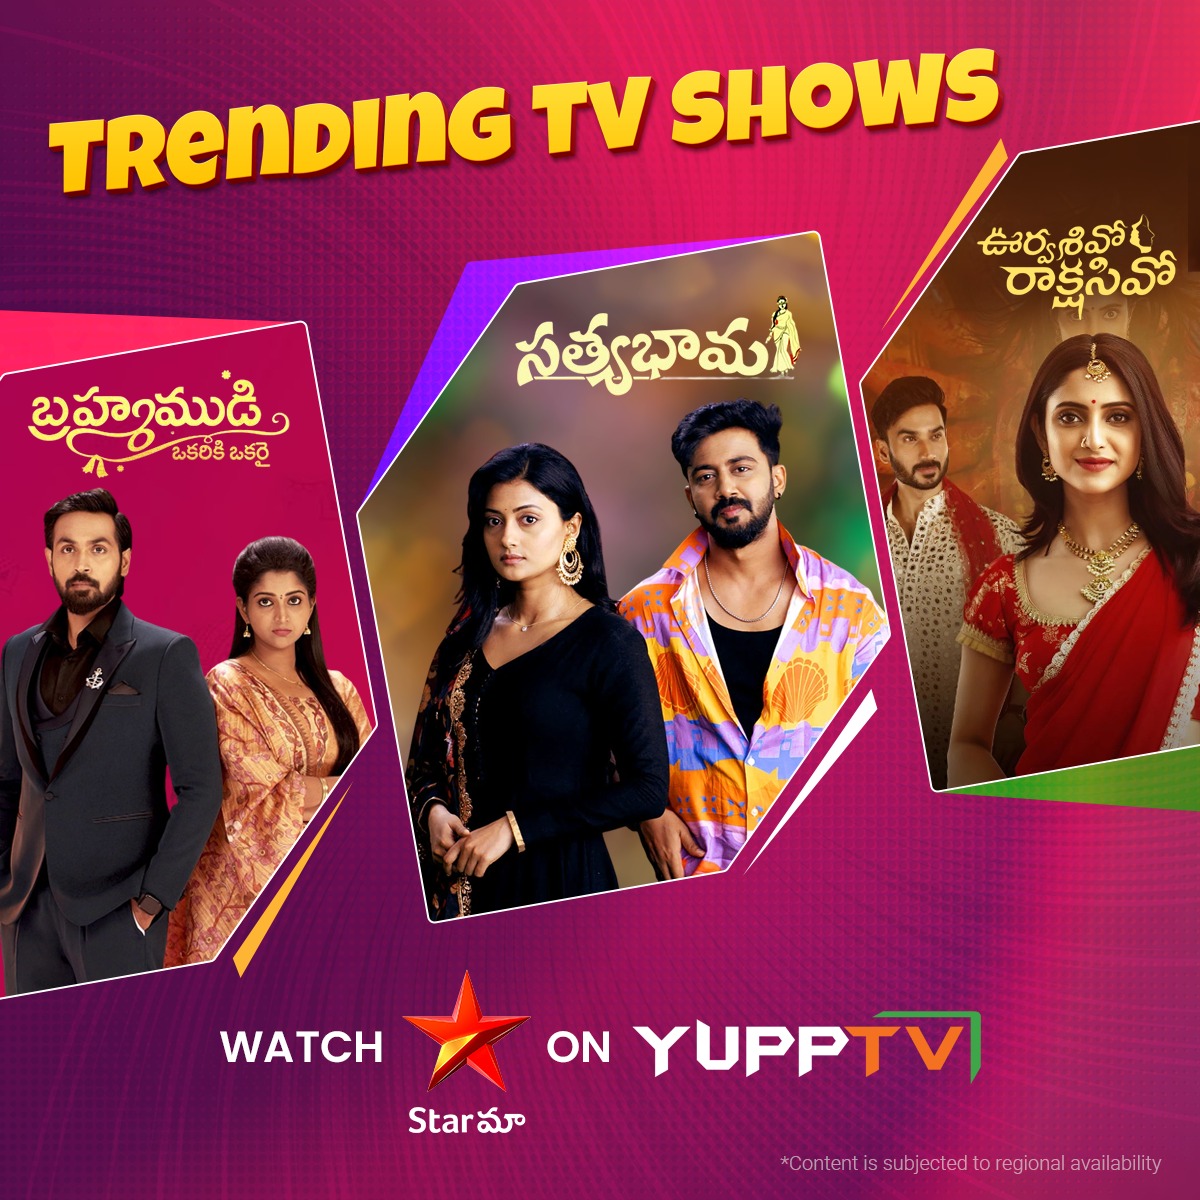 📺Trending TV Shows on Star మా !! Watch all the latest episodes of popular TV Shows streaming on #StarMaa now available on #YuppTV Channel content is subjected to regional availability**